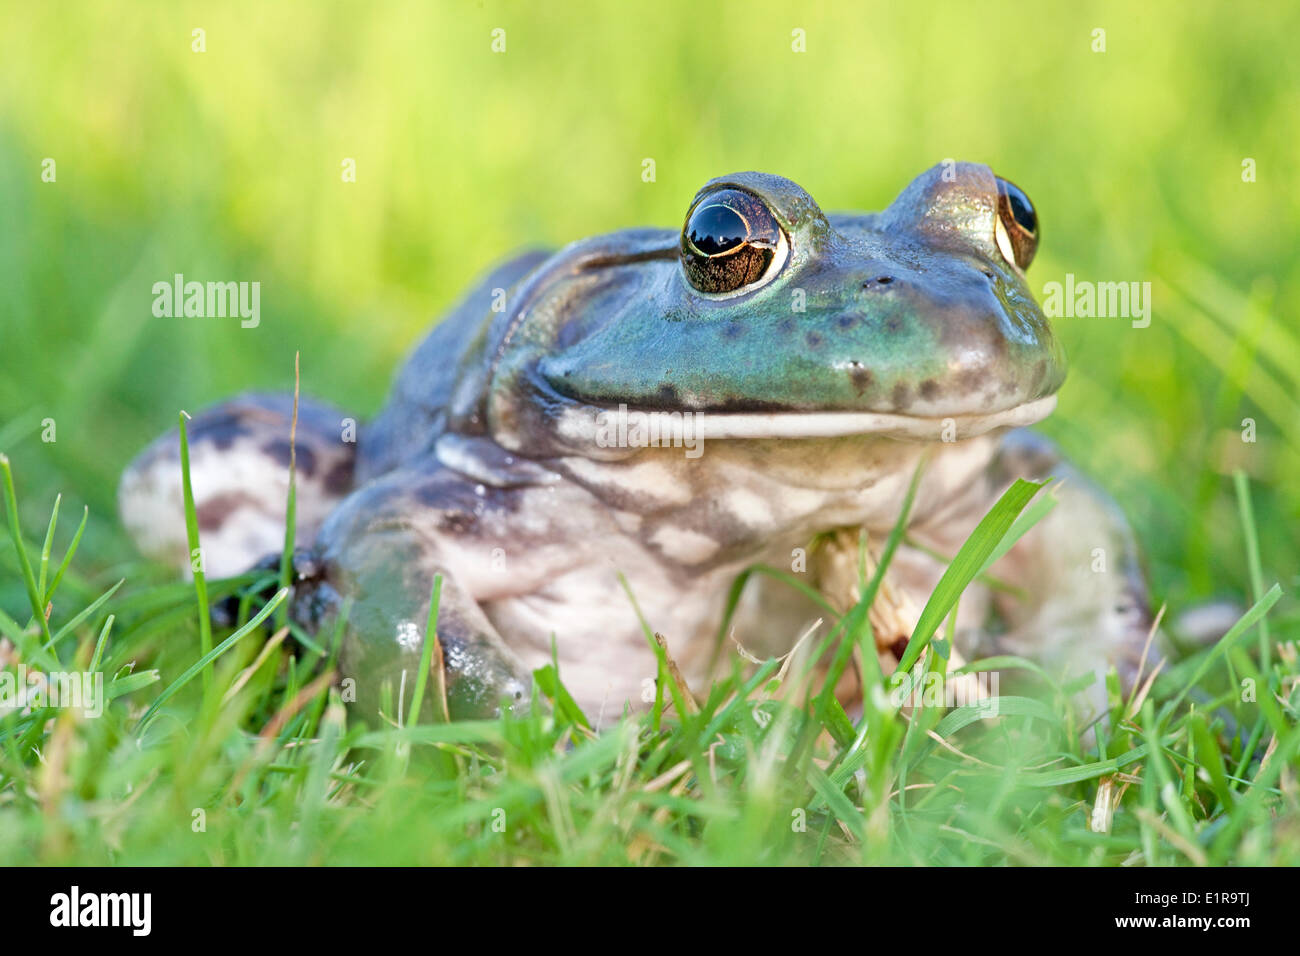 photo of a North American Bullfrog sitting in green grass; Stock Photo